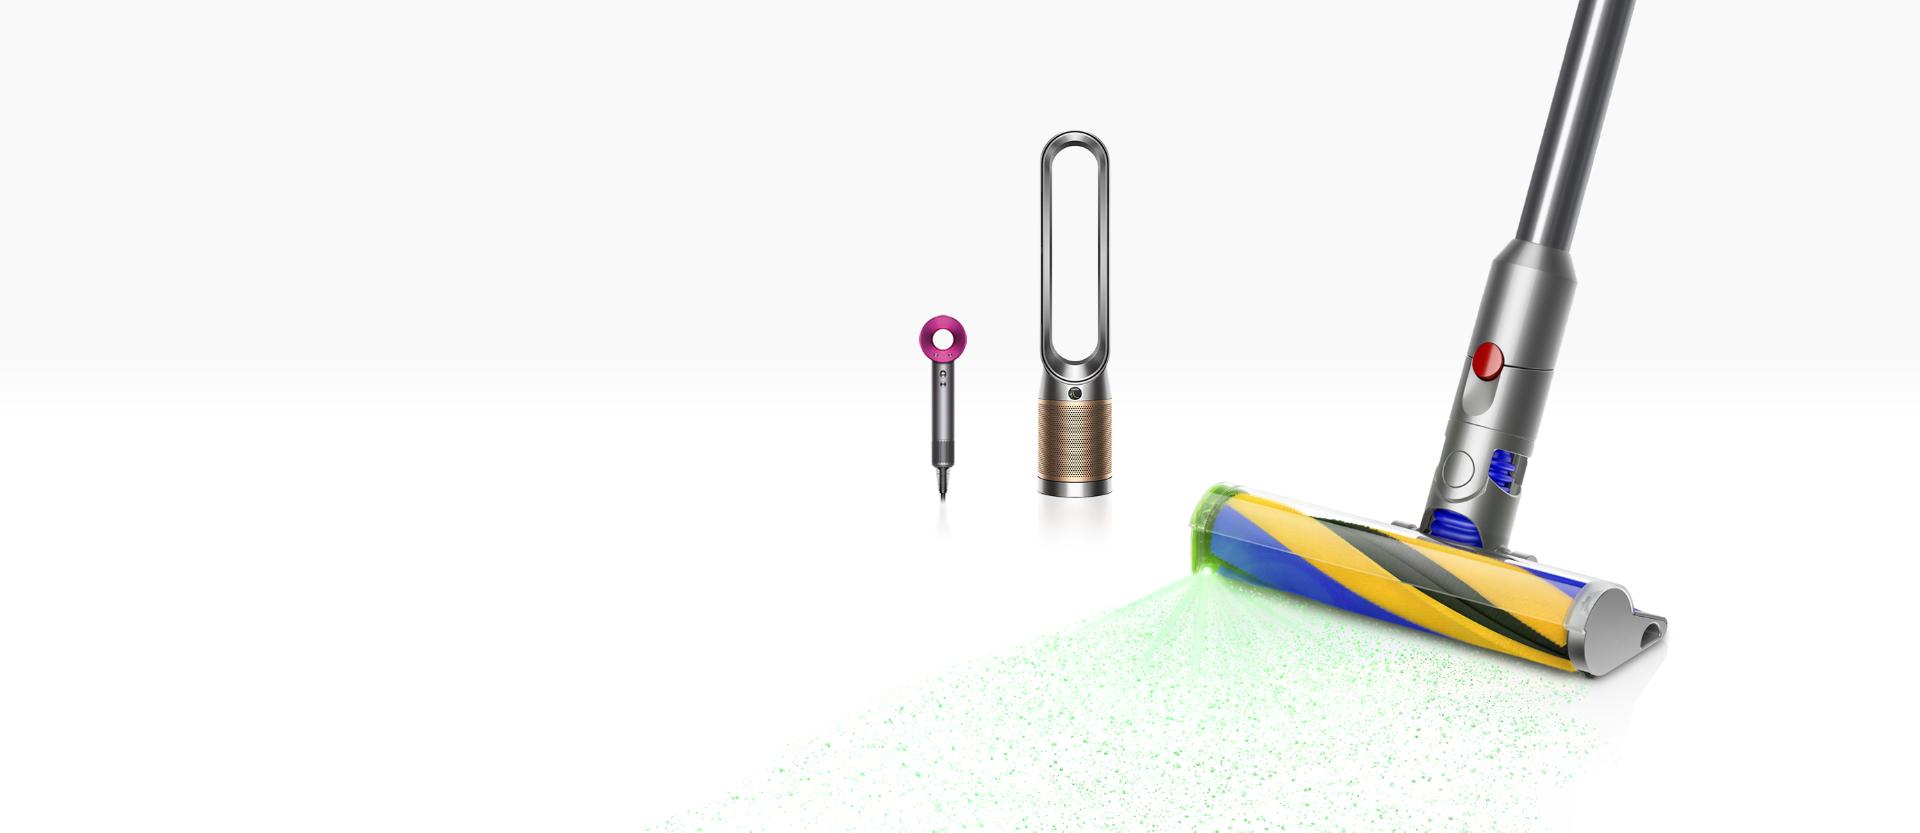 Range of Dyson products